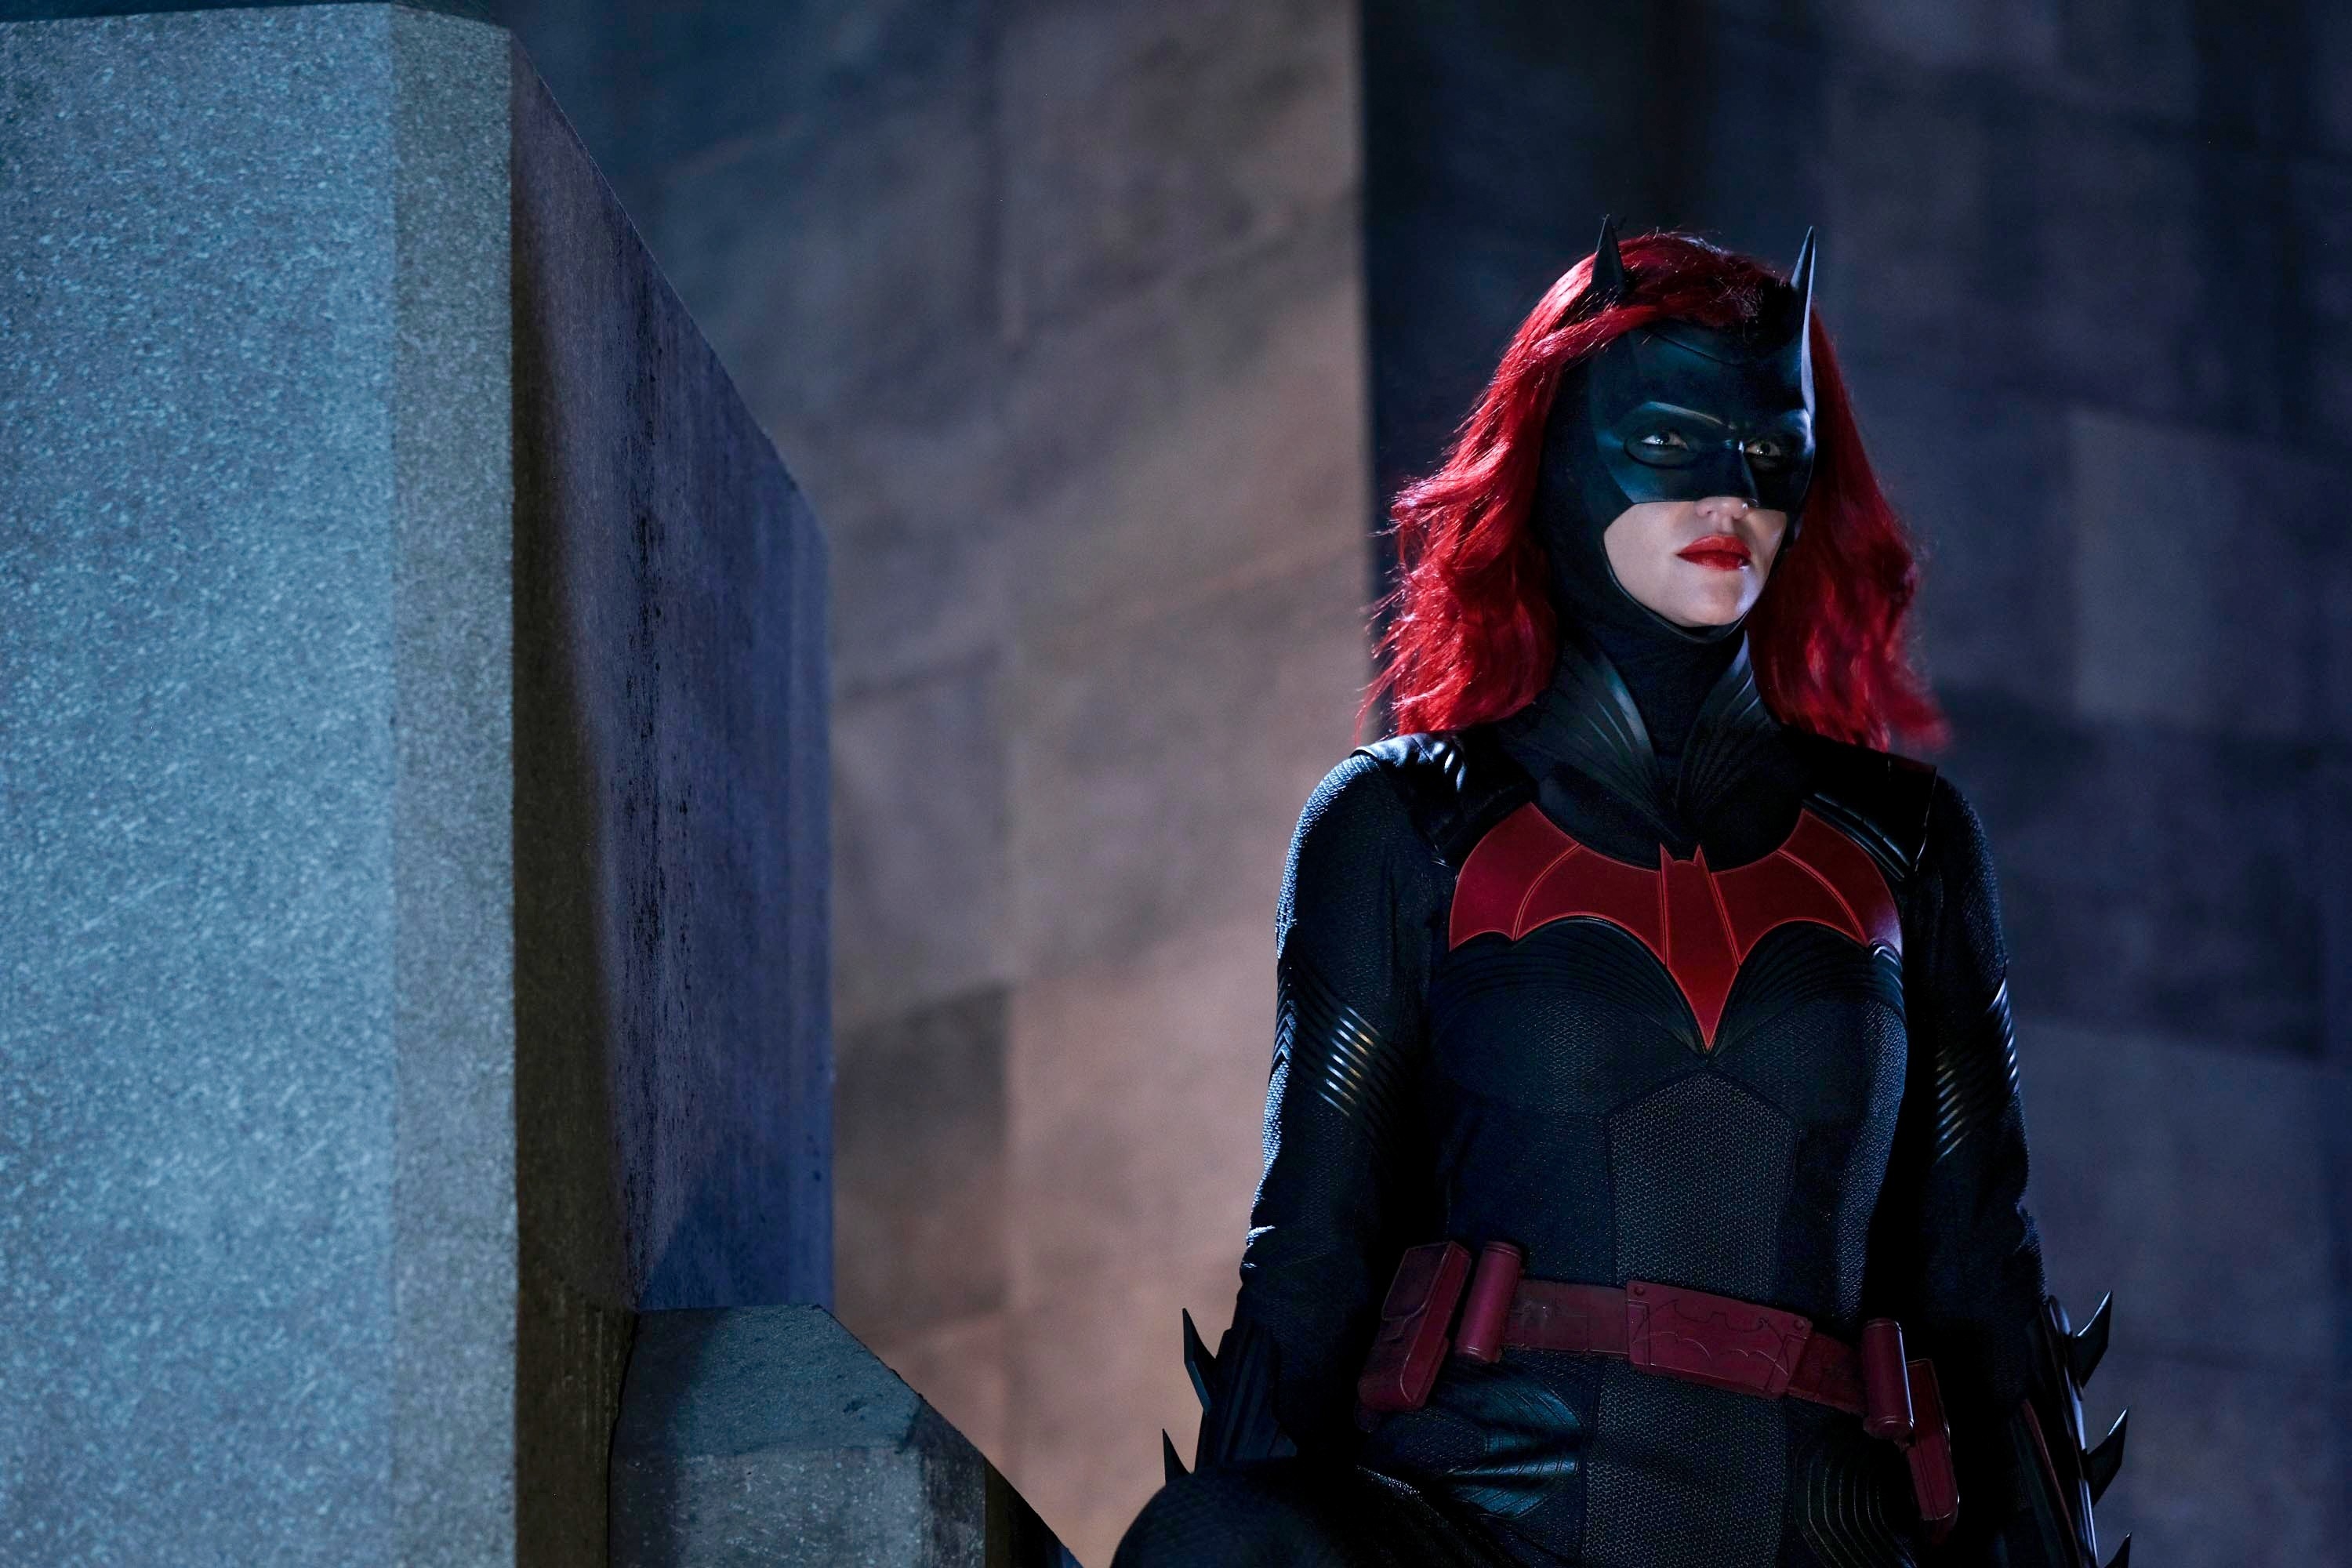 Rube looking off-screen as Batwoman